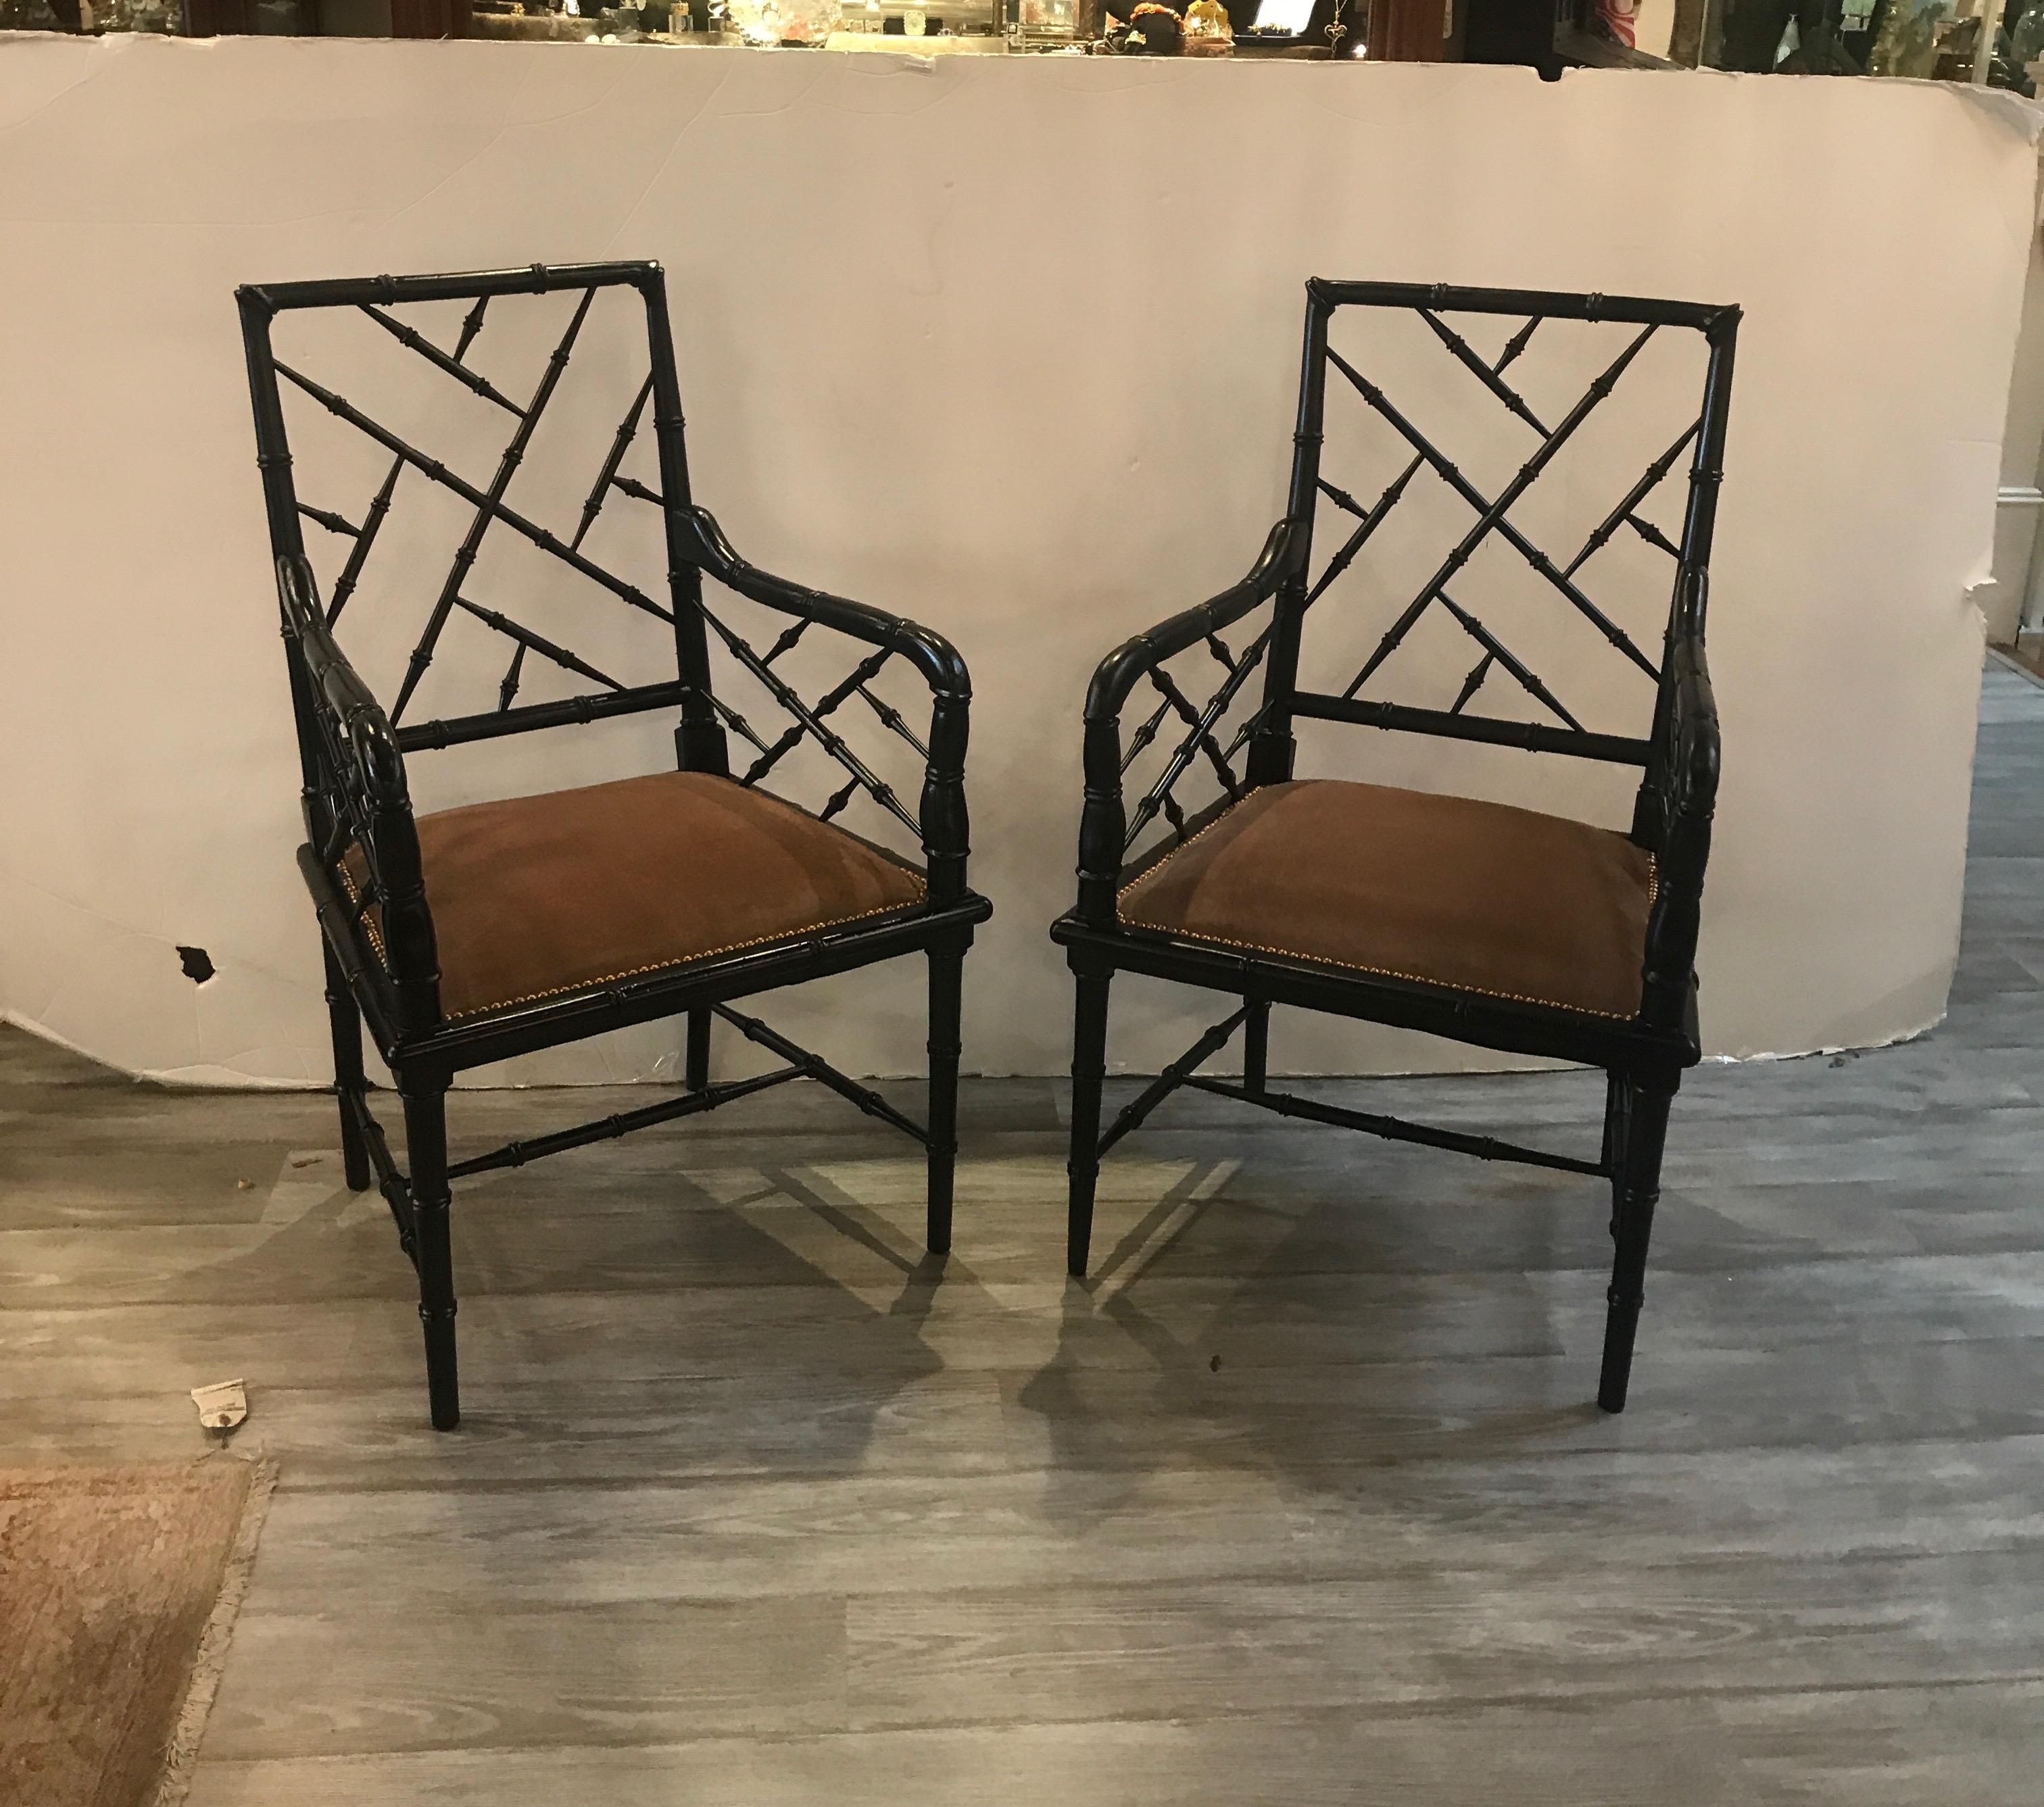 A great pair of Hollywood Regency armchairs with upholstered seats. The hardwood frames carve in a faux bamboo lattice pattern with new mink colored velvet attached seats. Beautifully made, of the James Mont style and era.